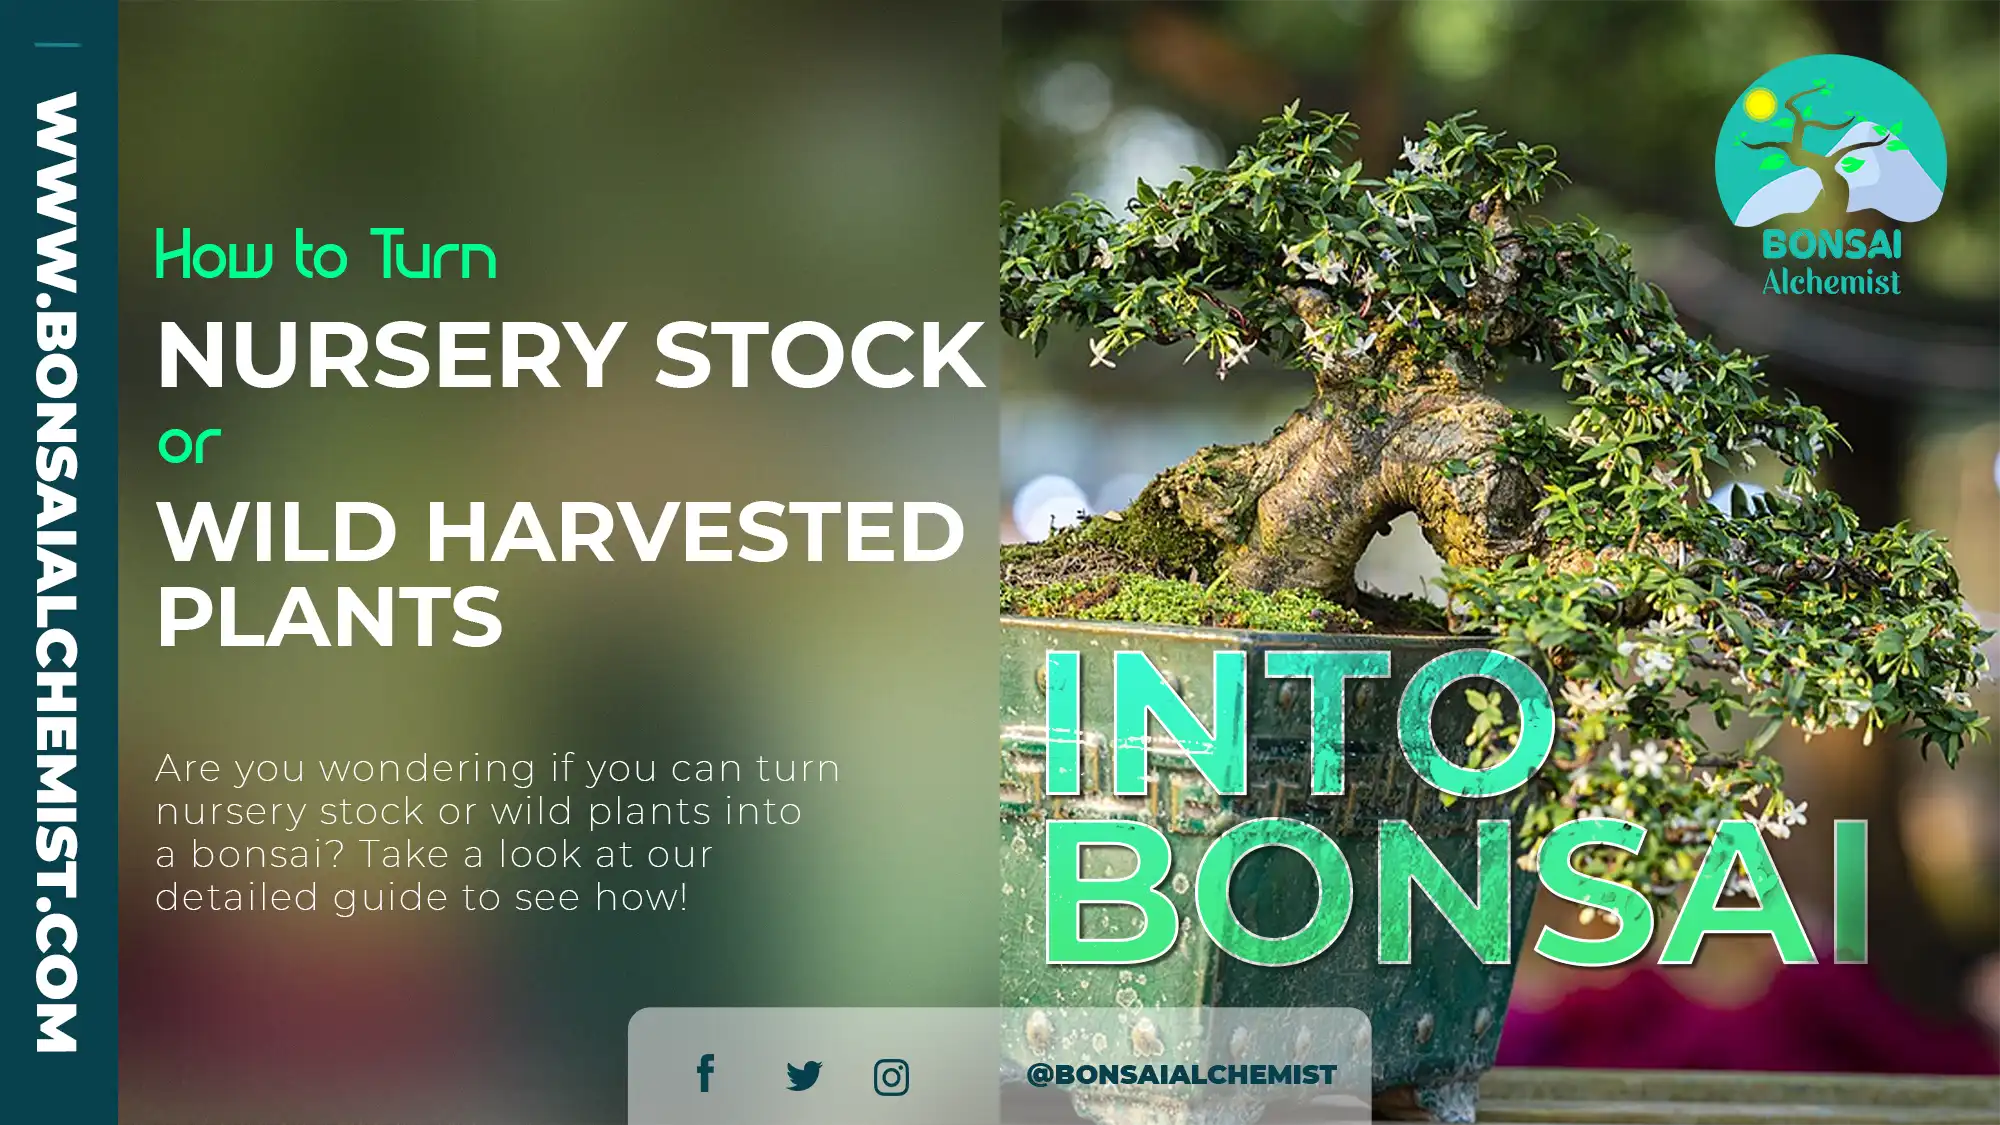 How to Turn Nursery Stock or Wild Harvested Plants Into Bonsai